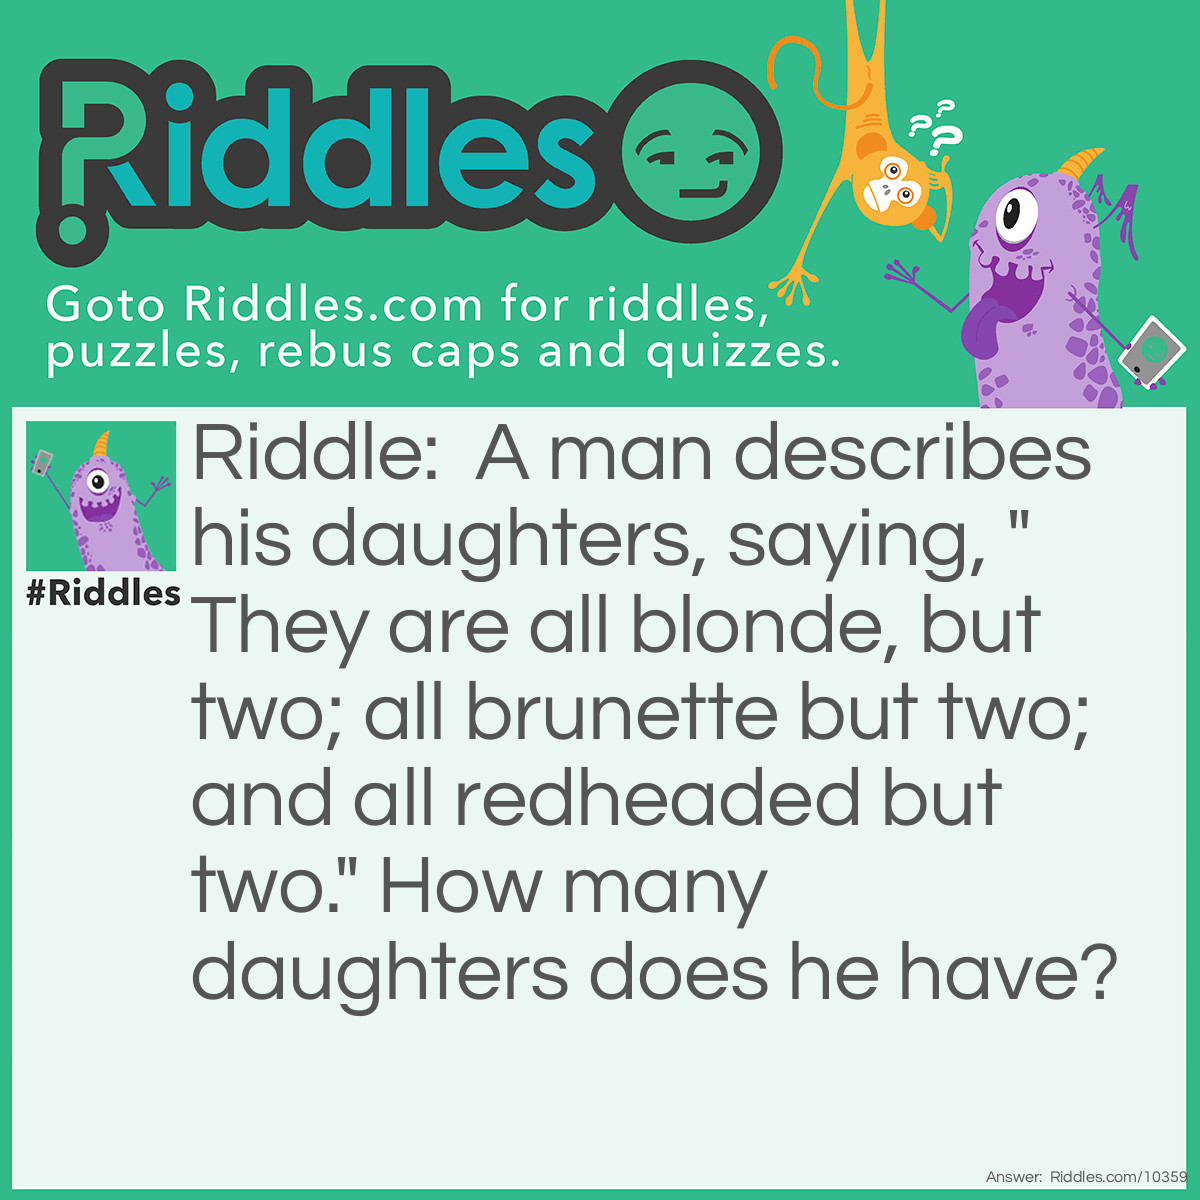 Riddle: A man describes his daughters, saying, "They are all blonde, but two; all brunette but two; and all redheaded but two." How many daughters does he have? Answer: Three: A blonde, a brunette and a redhead.